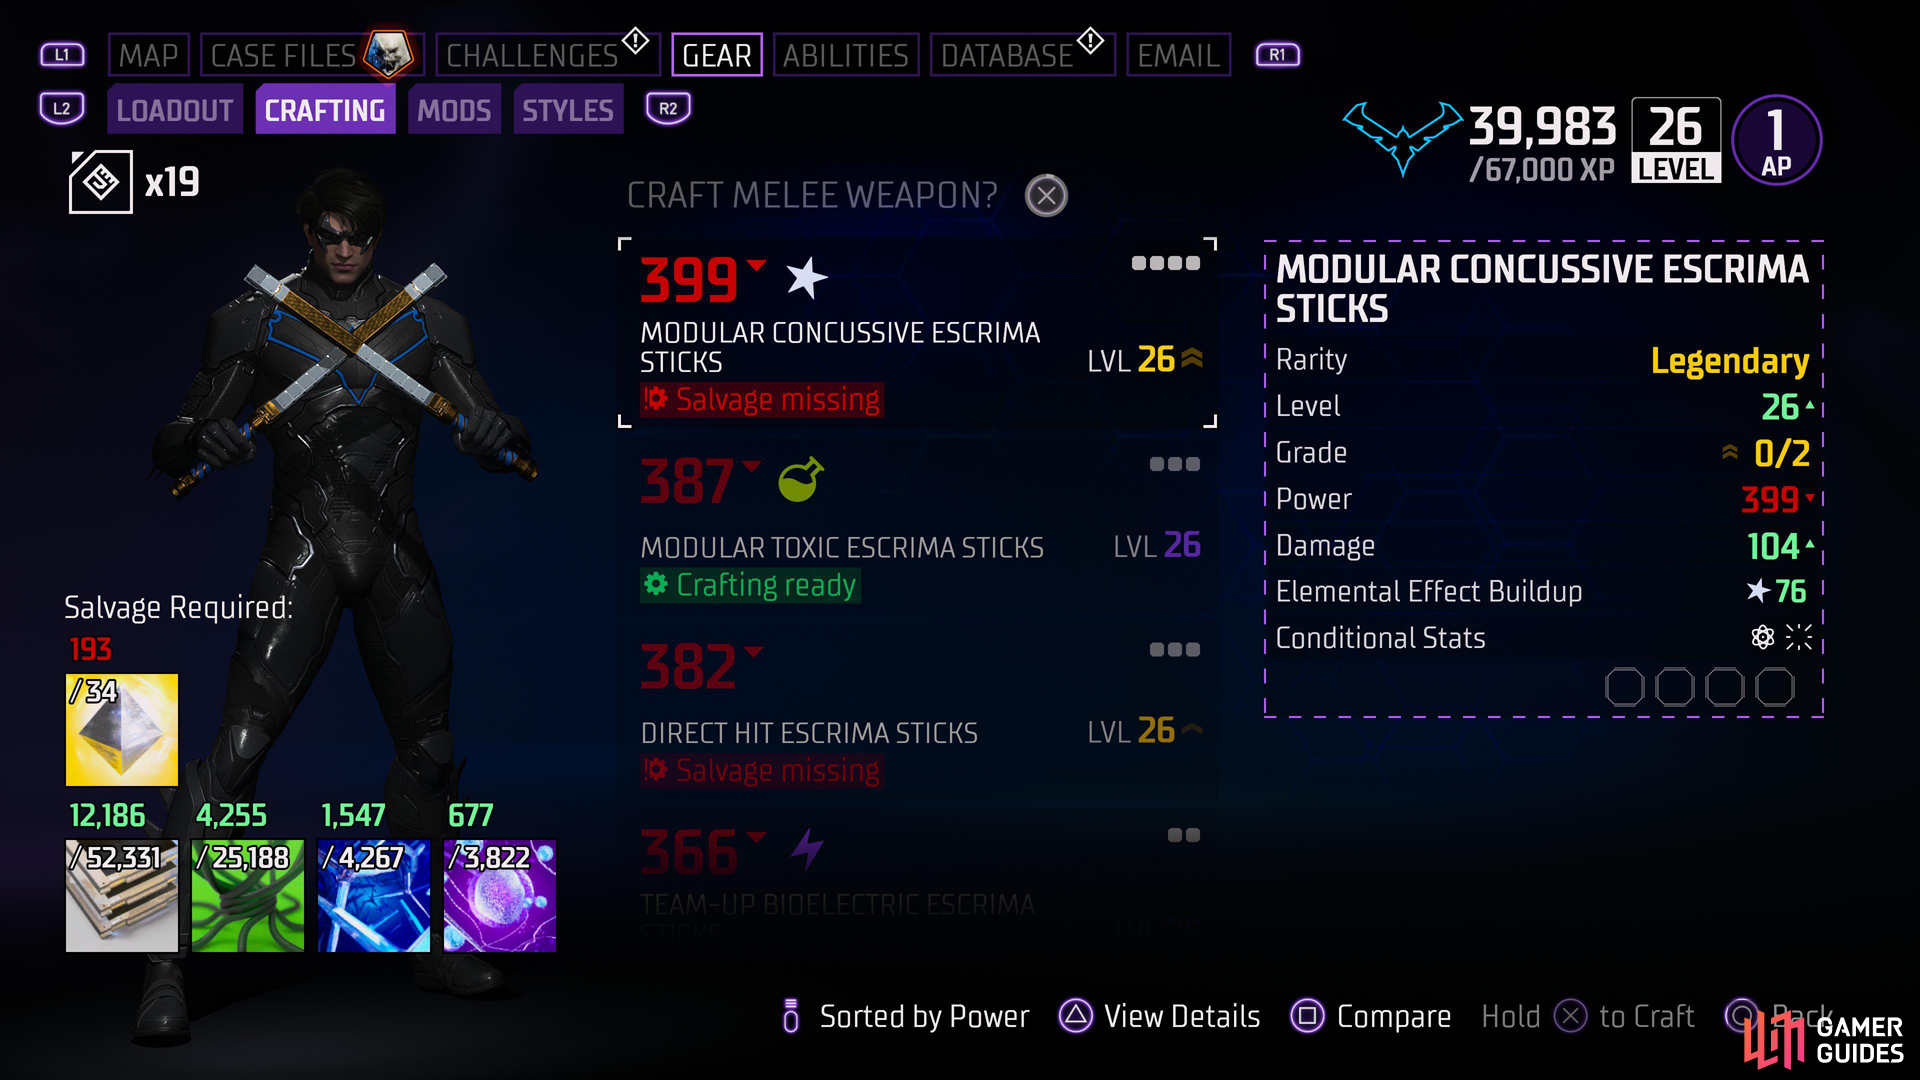 Legendary gear can boast higher stats, more mod slots and more passive stats than more common gear of a similar level.